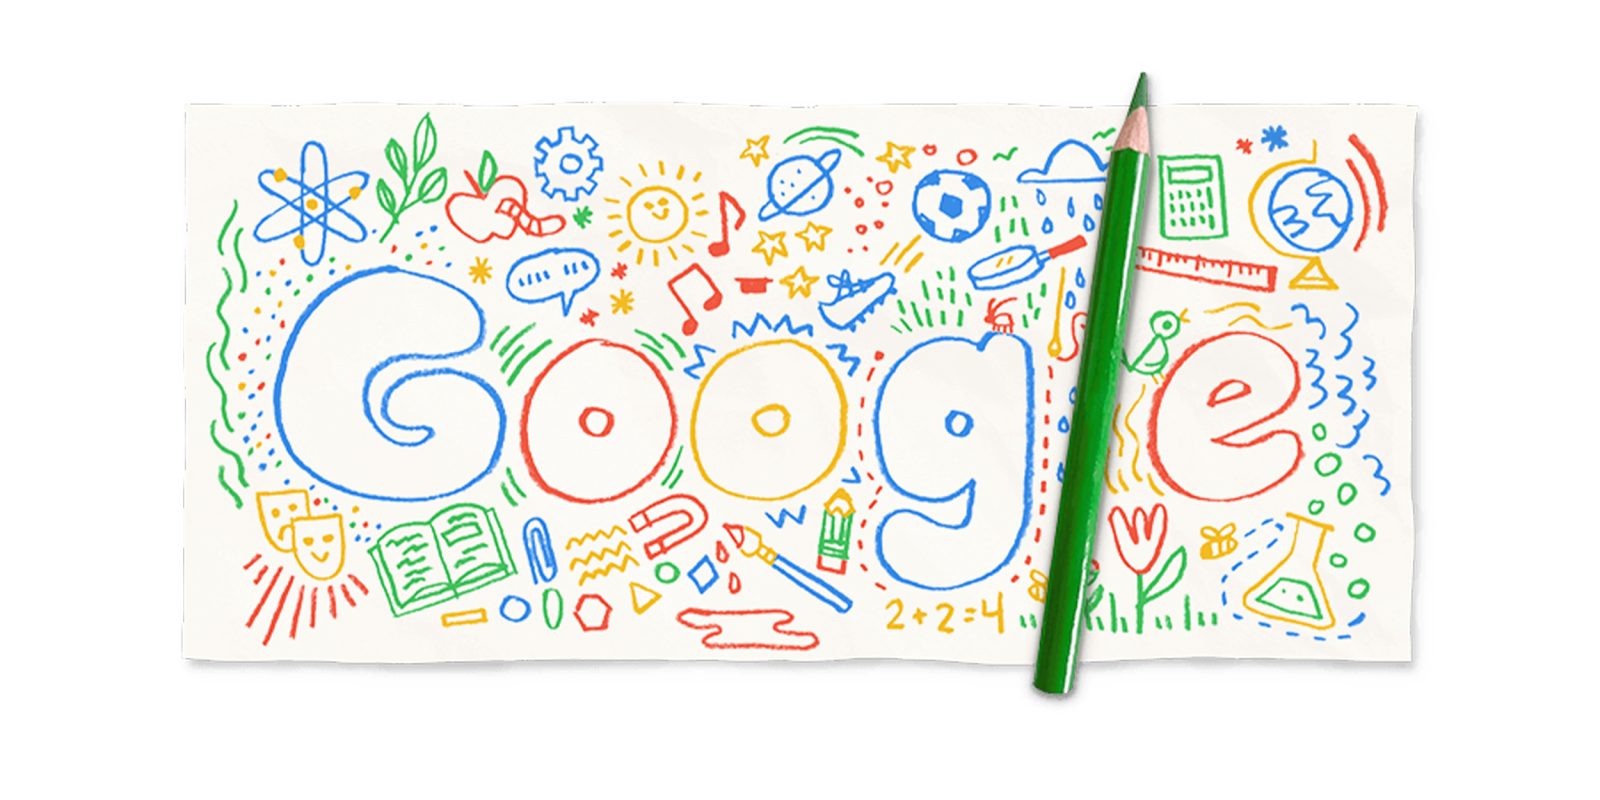 Google Doodle First day of school 2021